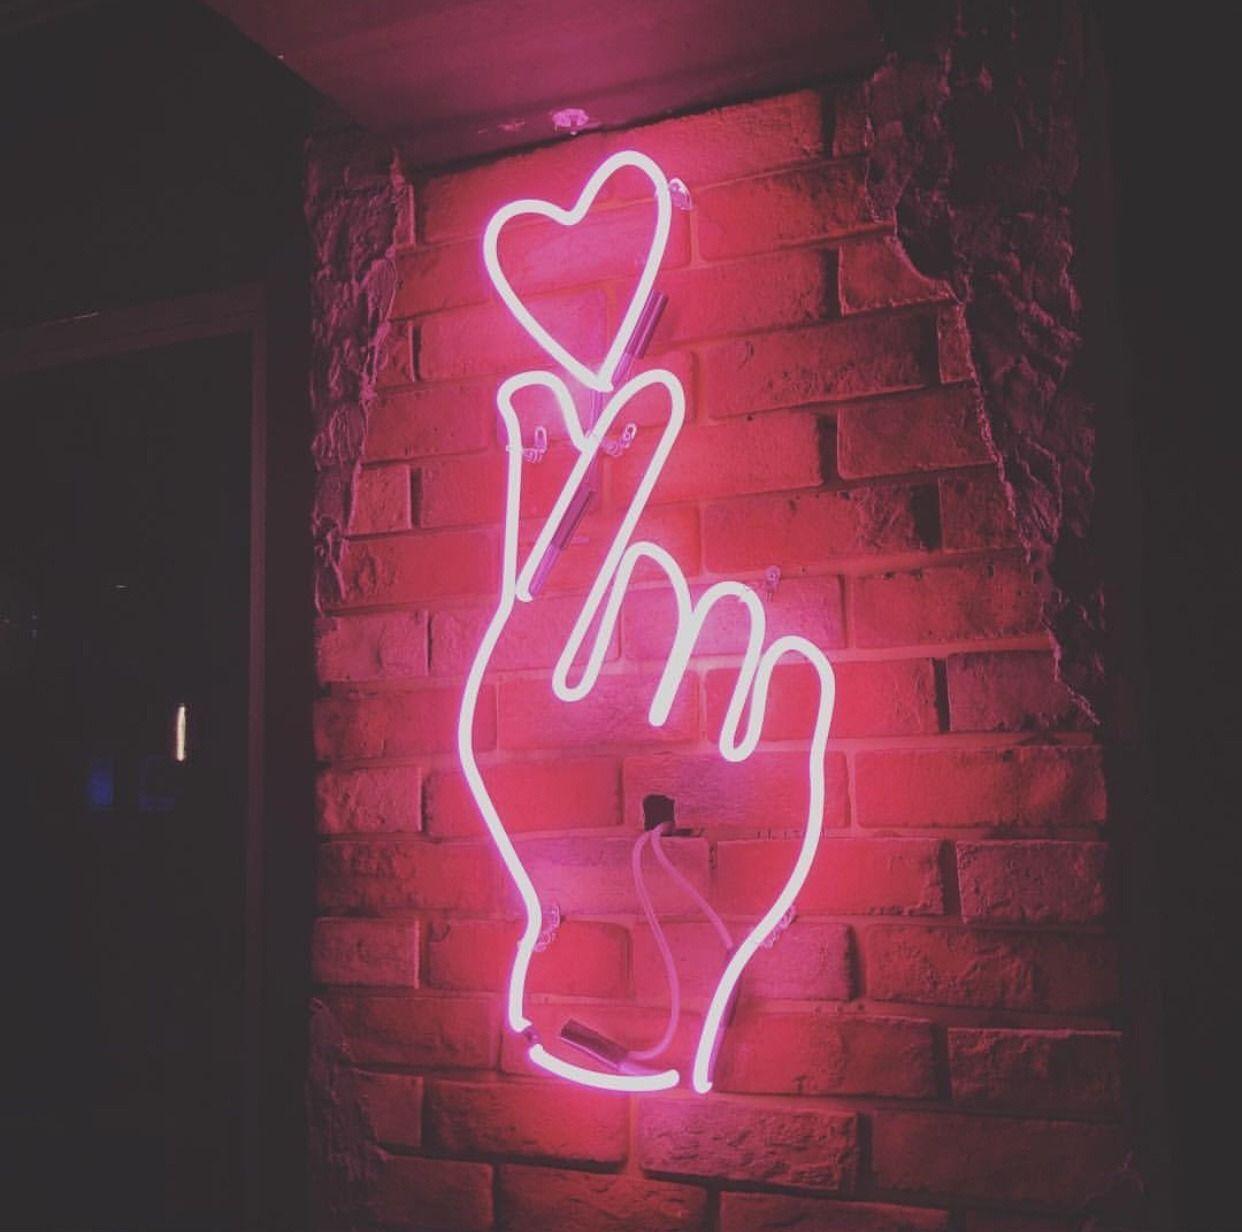 Featured image of post Red Neon Aesthetic Heart The weeknd abel tesfaye abelxo starboy songs neon theme neon aesthetic neon sign neon lights neon neon red aesthetic glow blog bright glow glowinthedark neon wall art neon words neon wall lights in the night tumblr themes